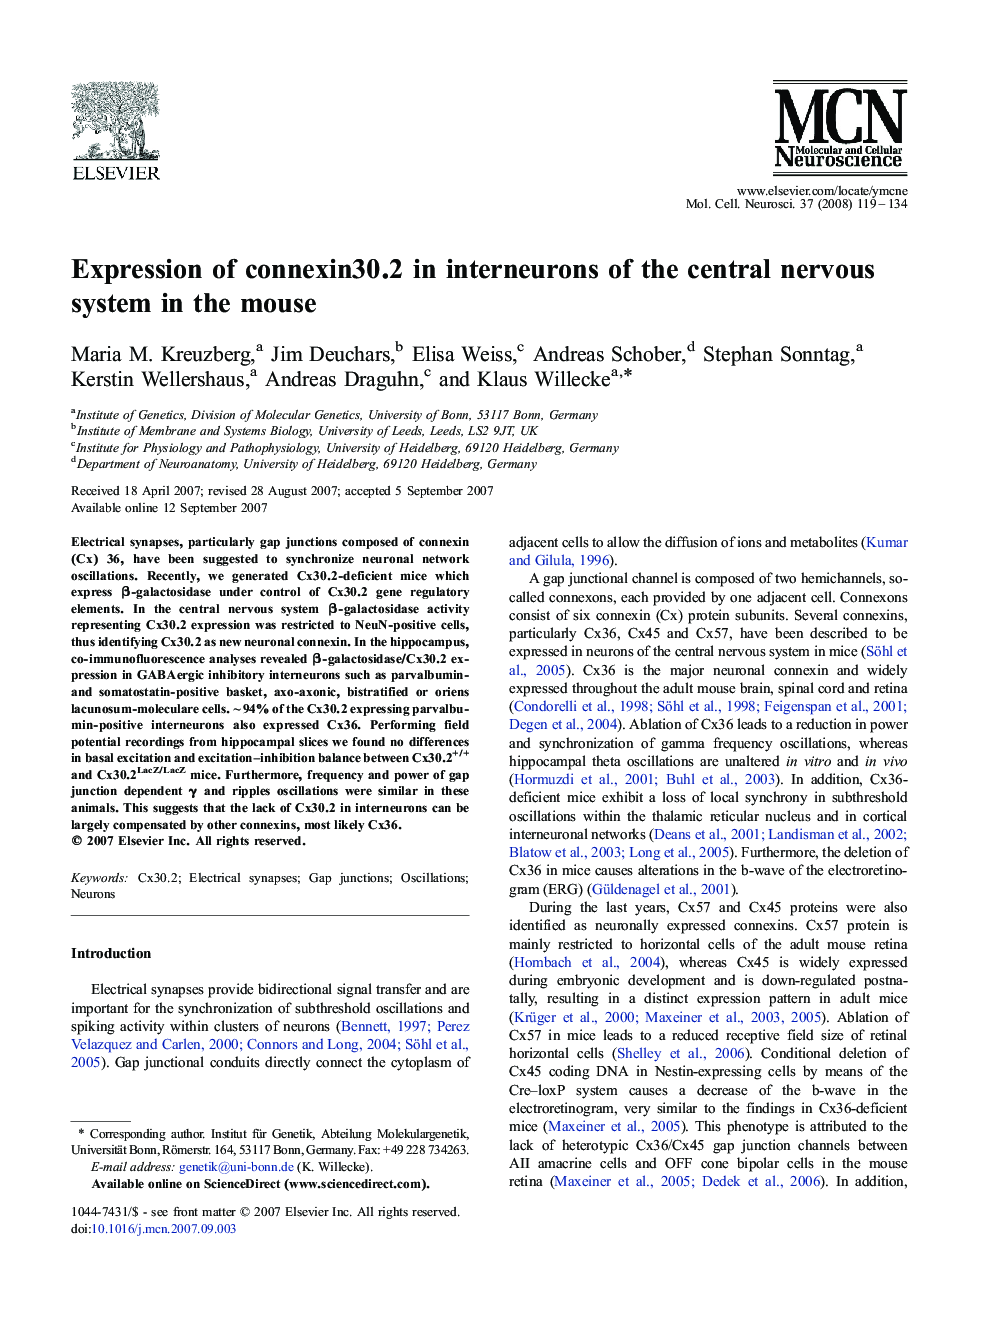 Expression of connexin30.2 in interneurons of the central nervous system in the mouse